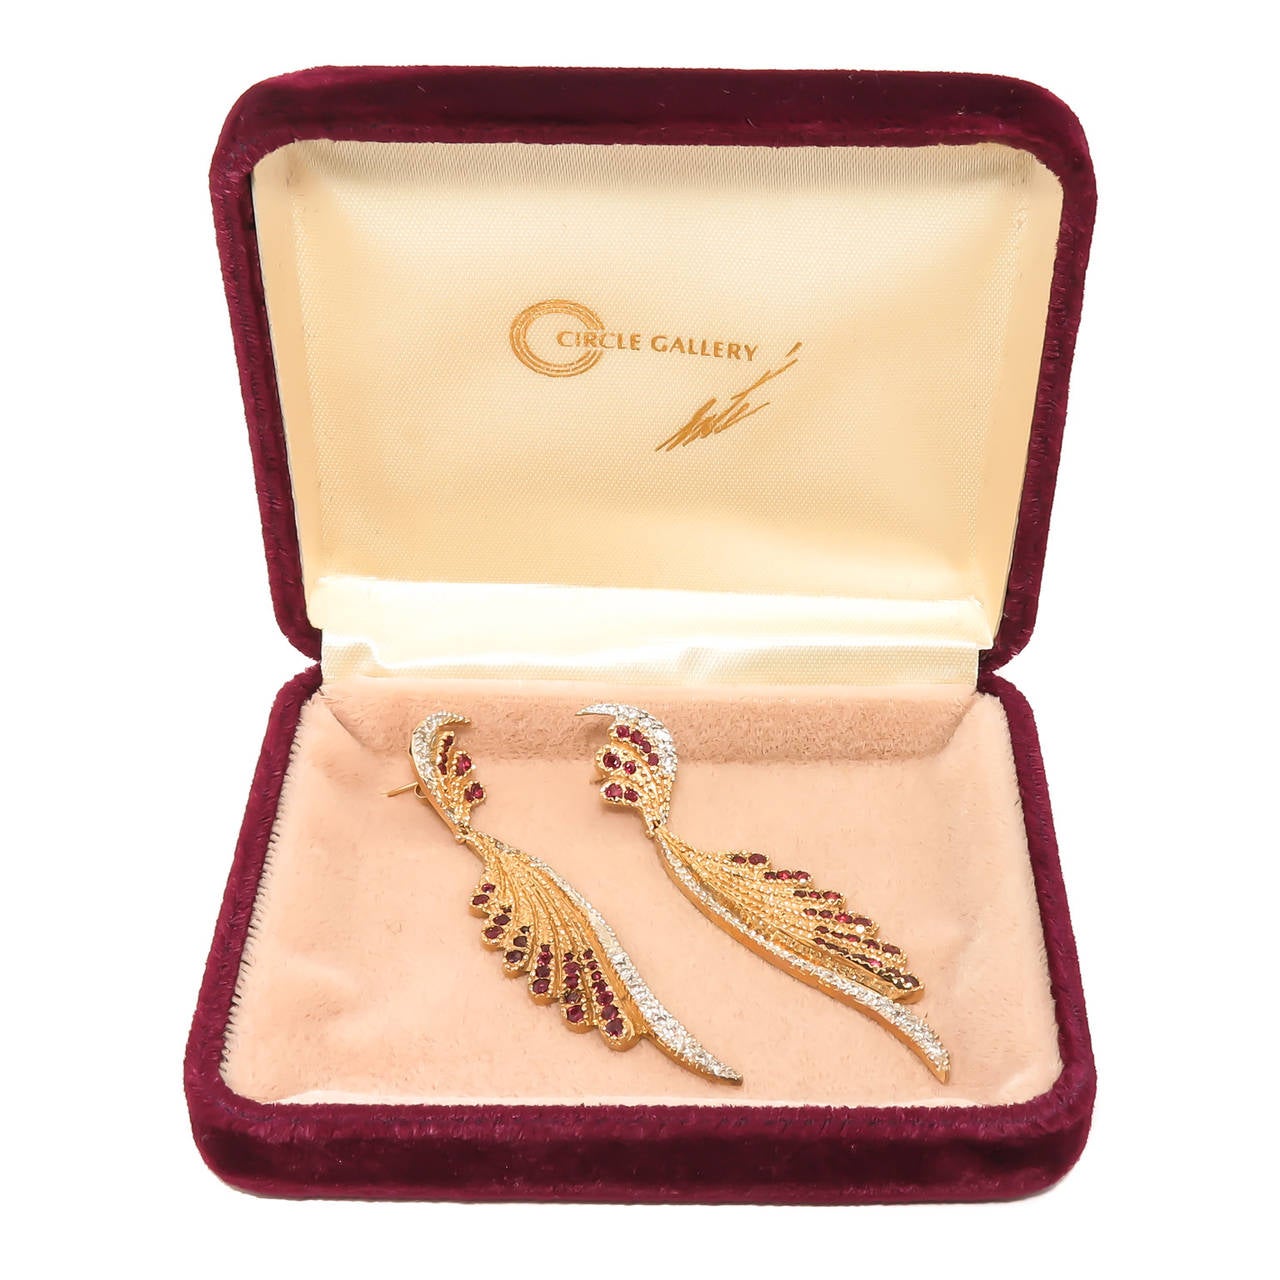 Circa 1980 Erte Fantasy collection Dangle earrings, 14K yellow gold set with Rubies and Diamonds. Measuring 3 inch in length and having post backs, signed and numbered and comes in the Original presentation case from Circle Fine Art Galleries.